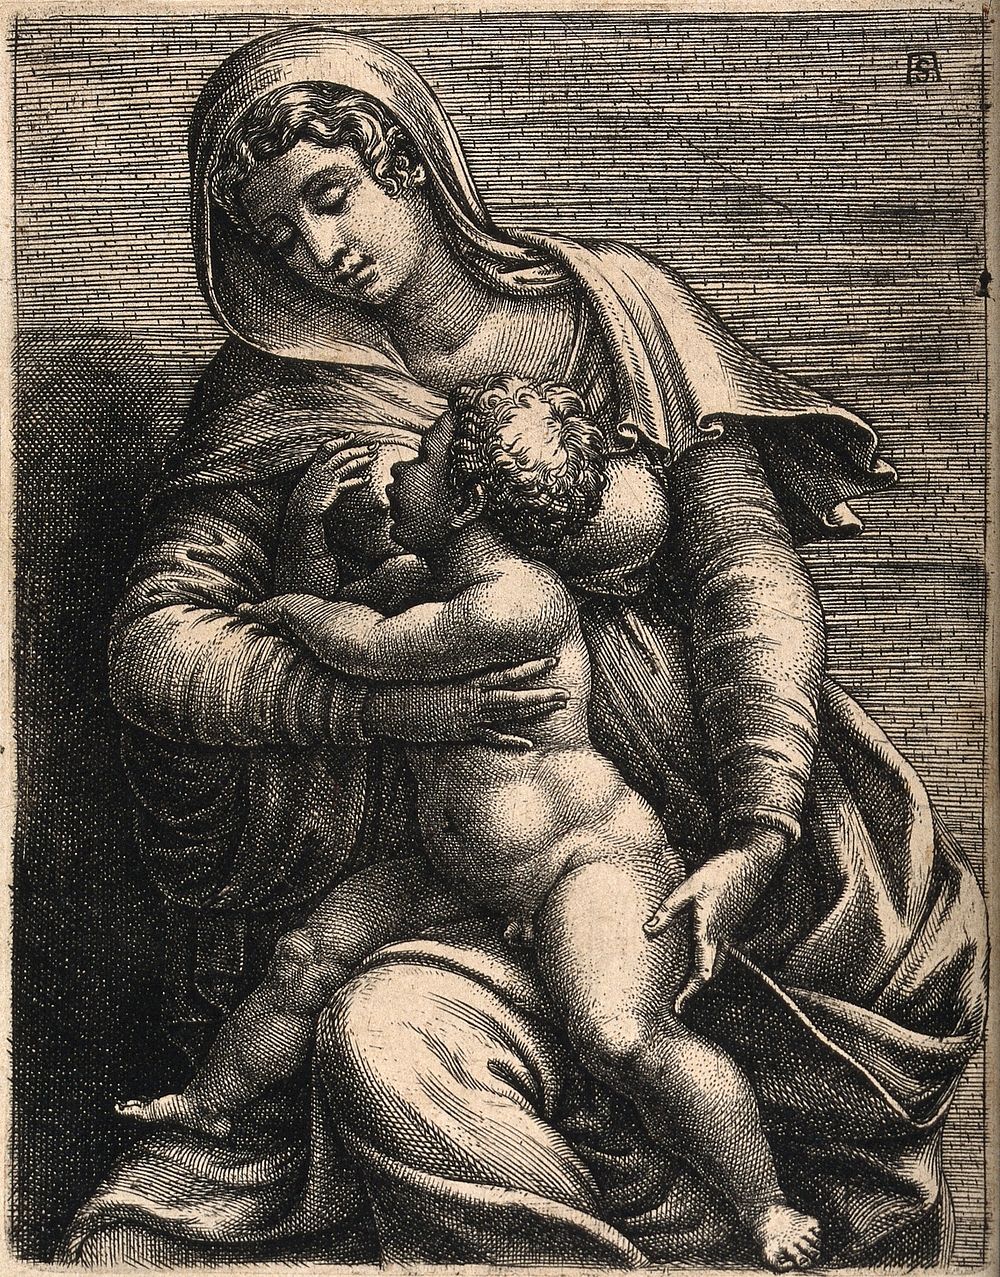 Saint Mary (the Blessed Virgin) with the Christ Child. Engraving by A. Scultori, il Mantovano, after G.B. Scultori.